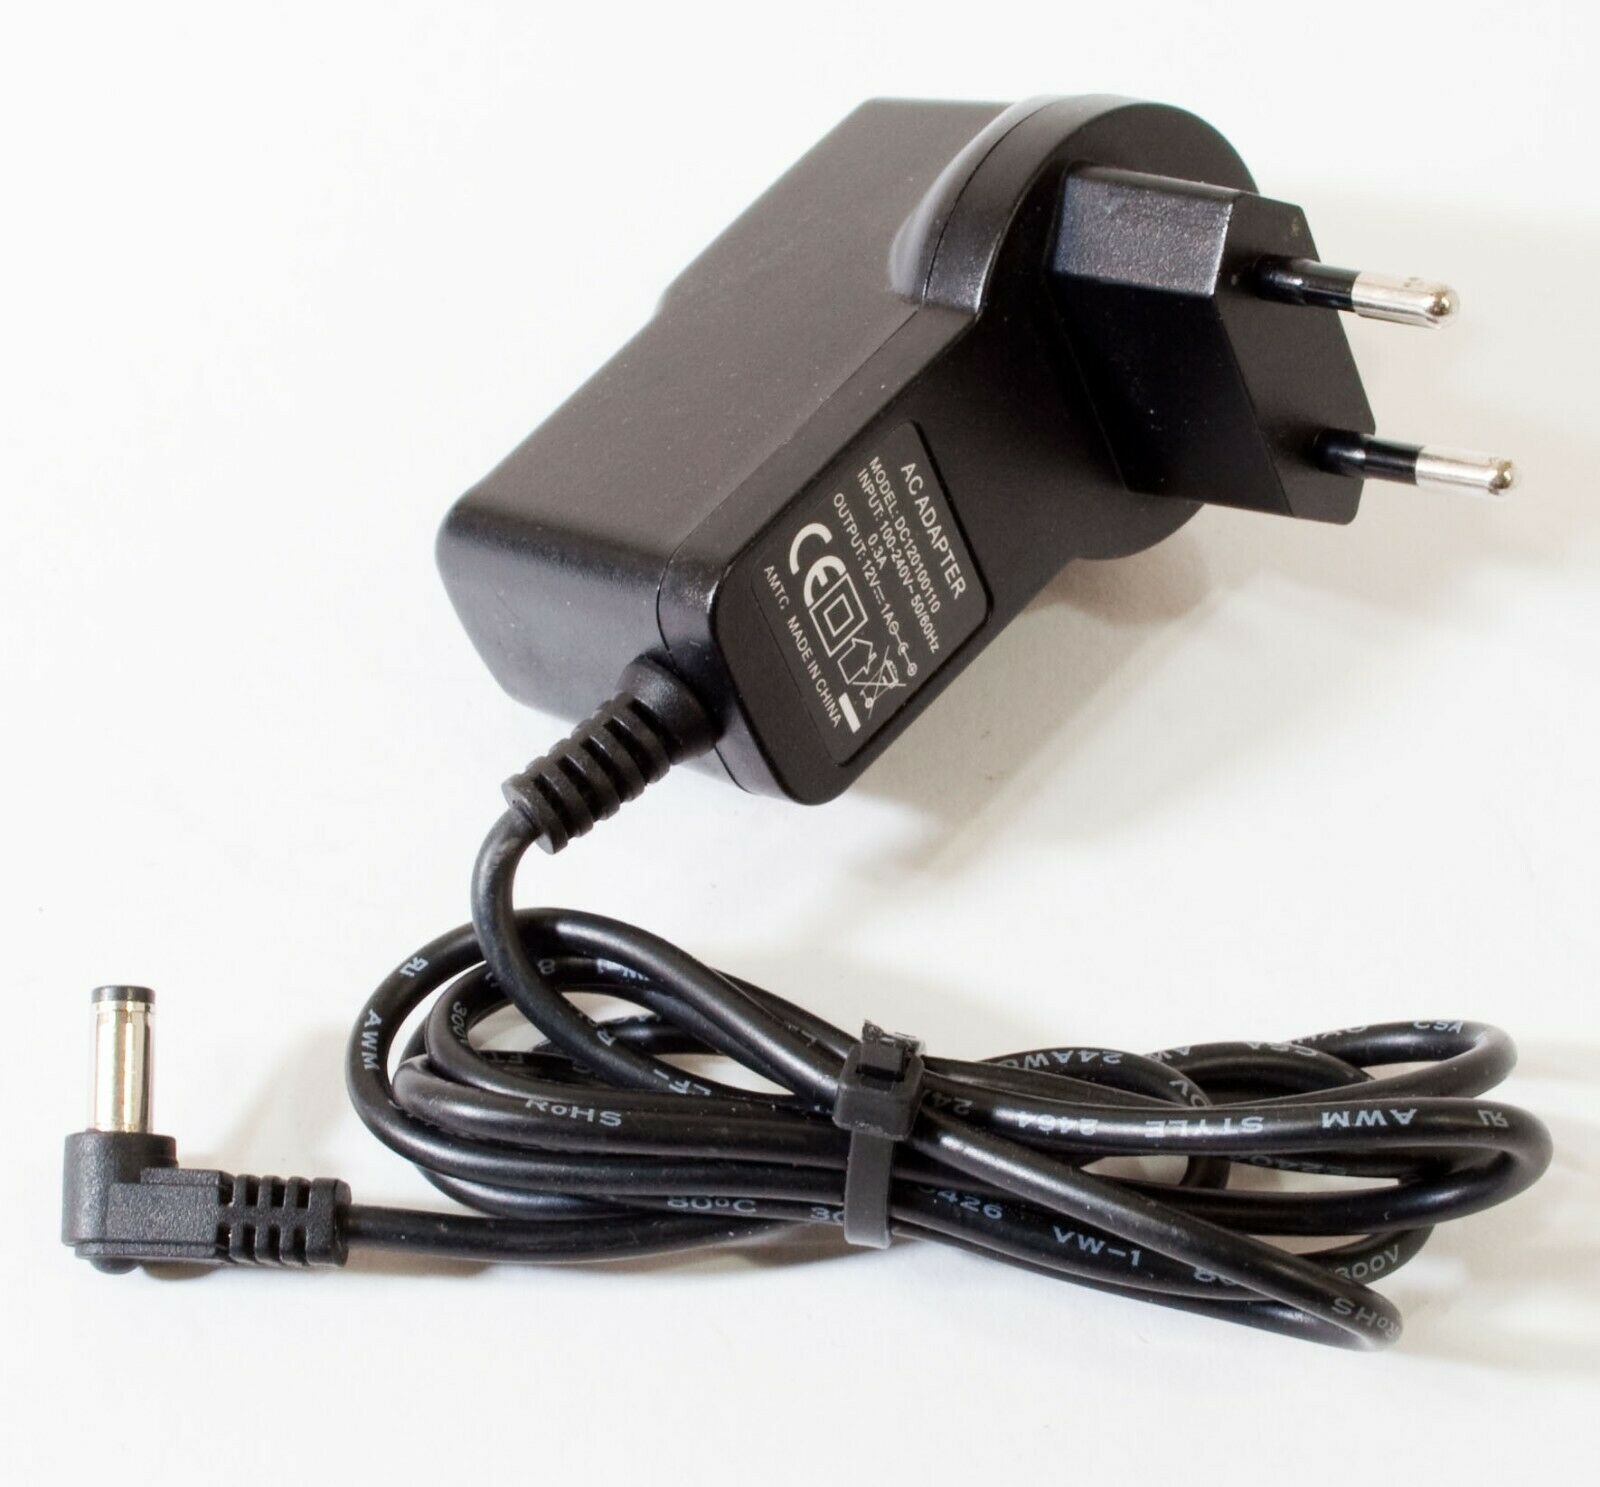 Yonghao DC120100110 AC Adapter 12V 1A Original Power Supply Europlug Compatible Brand: For Yonghao Type: Power Adapt